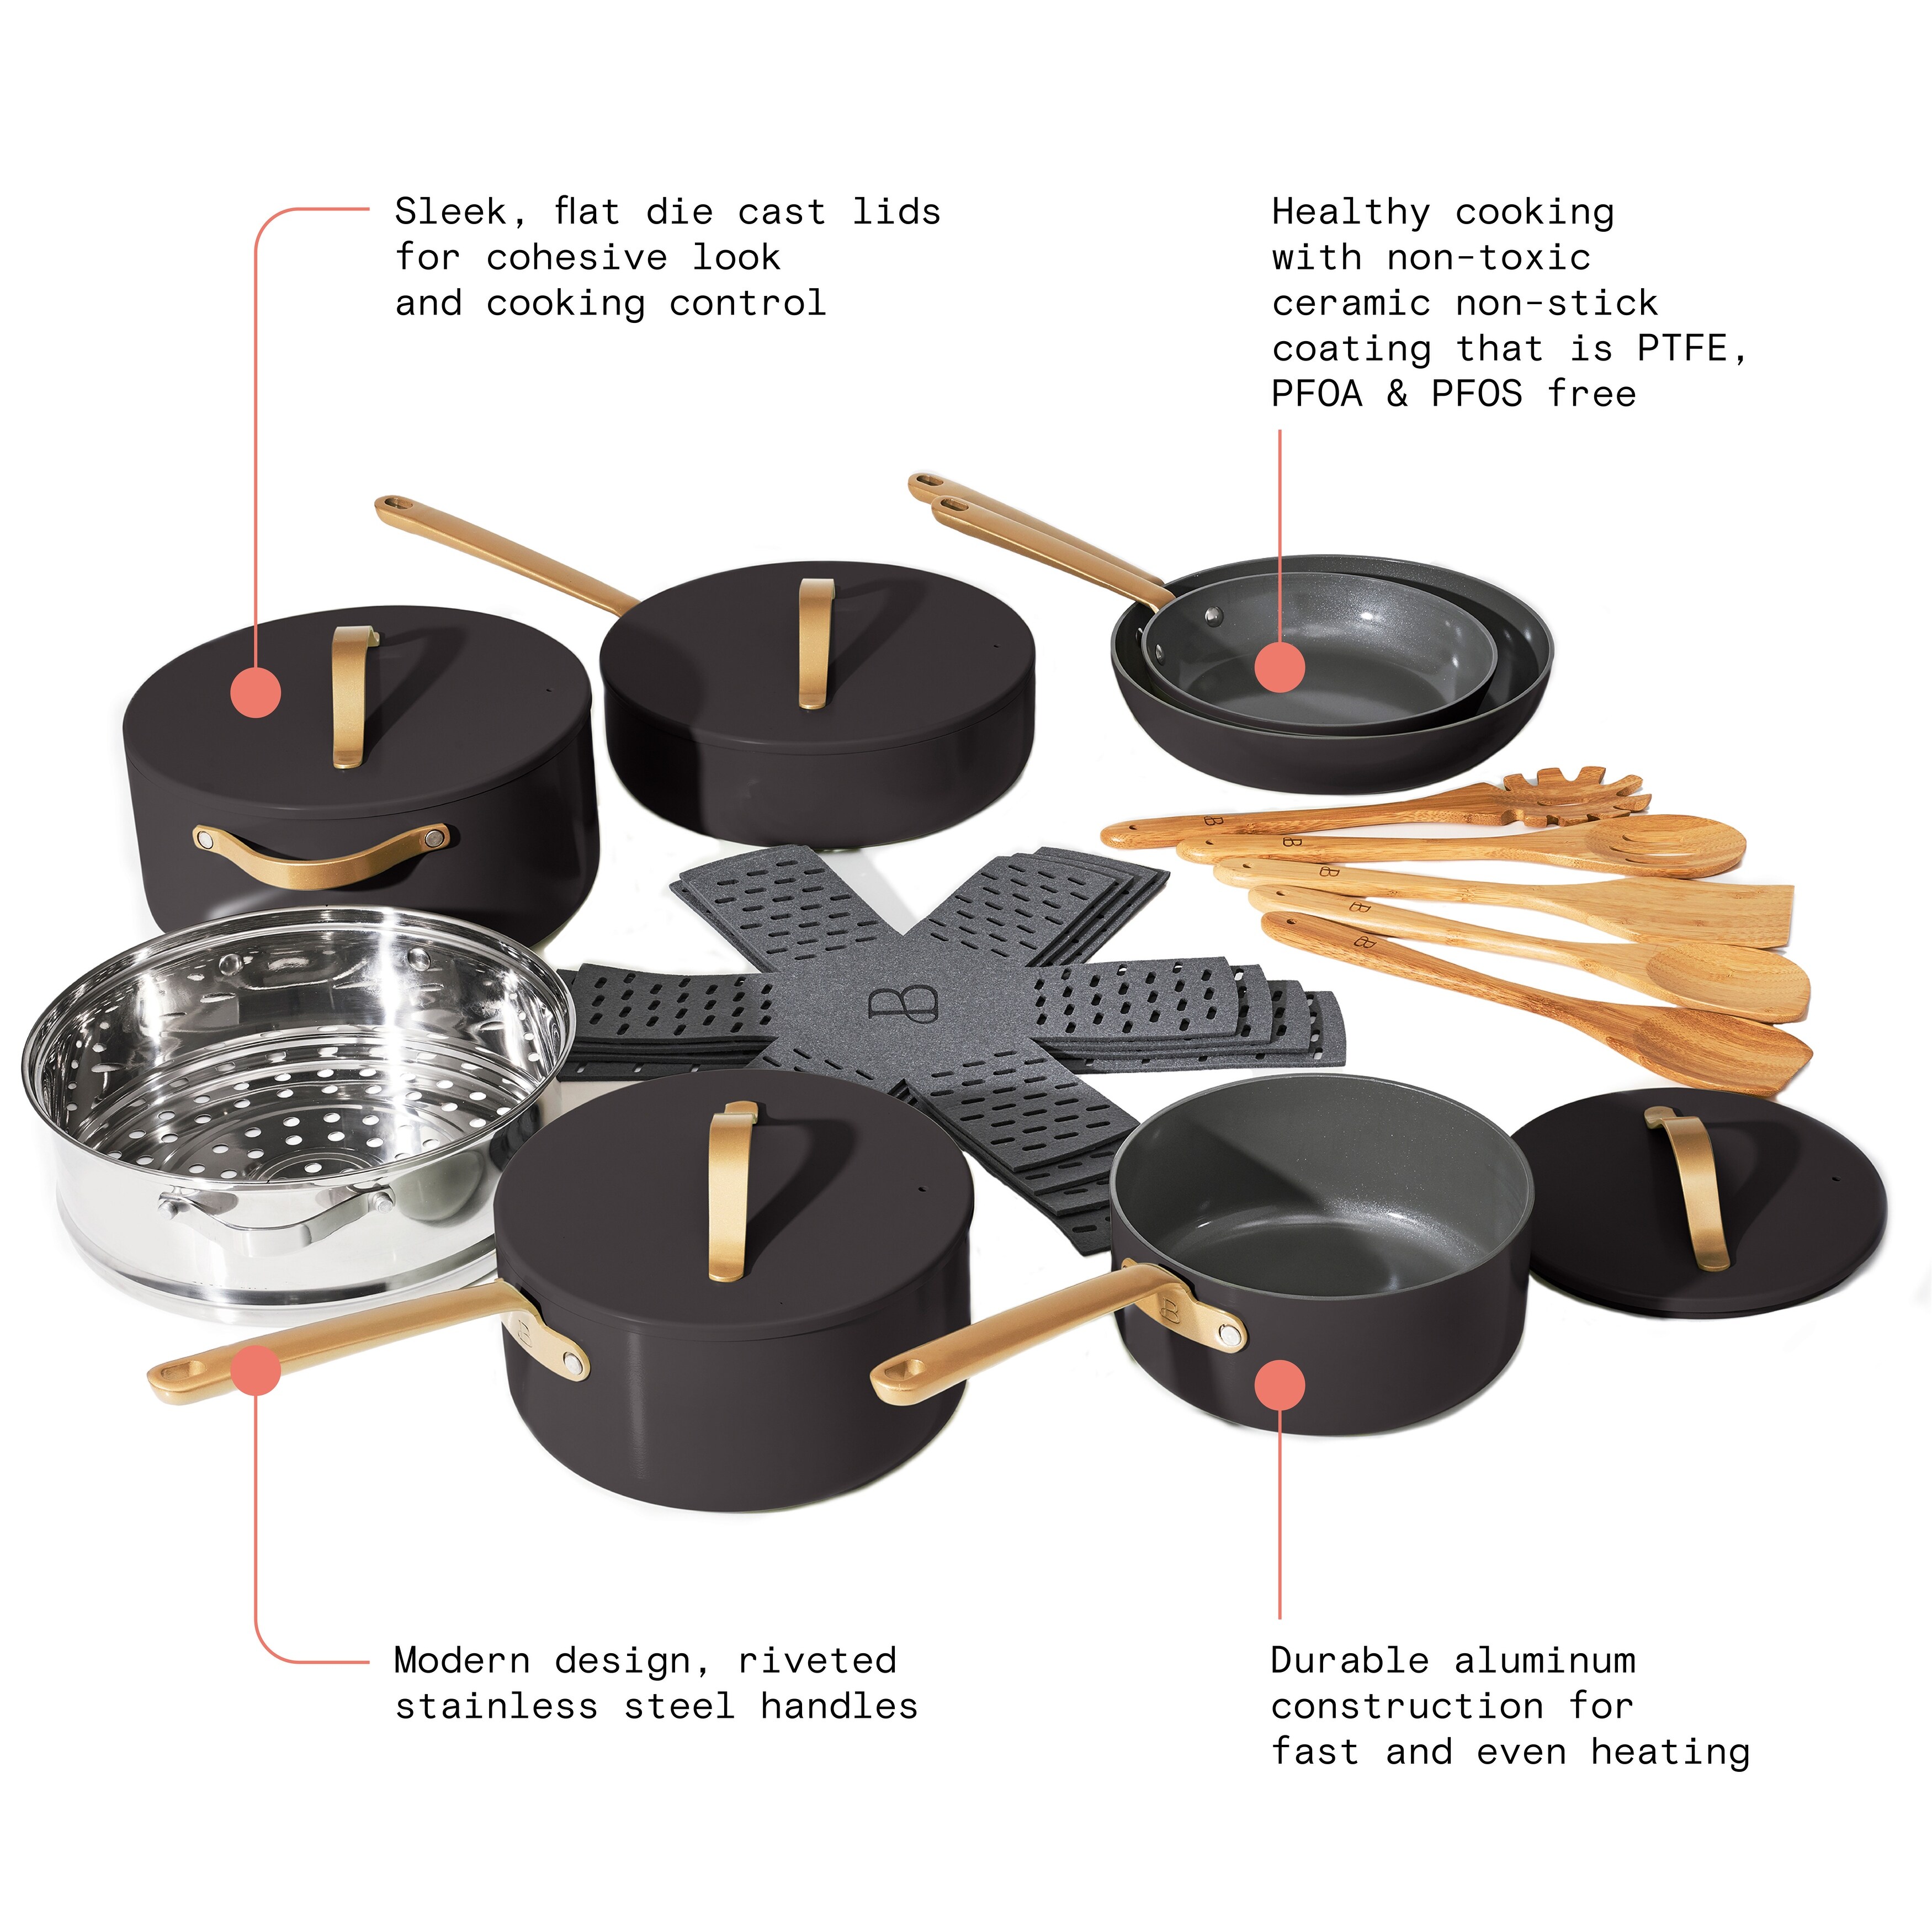 https://ak1.ostkcdn.com/images/products/is/images/direct/d03b7b8b61e0e3e41da5245e1b06143d6e728aac/20pc-Ceramic-Non-Stick-Cookware-Set%2C-Cornflower-Blue%2C-by-Drew-Barrymore.jpg